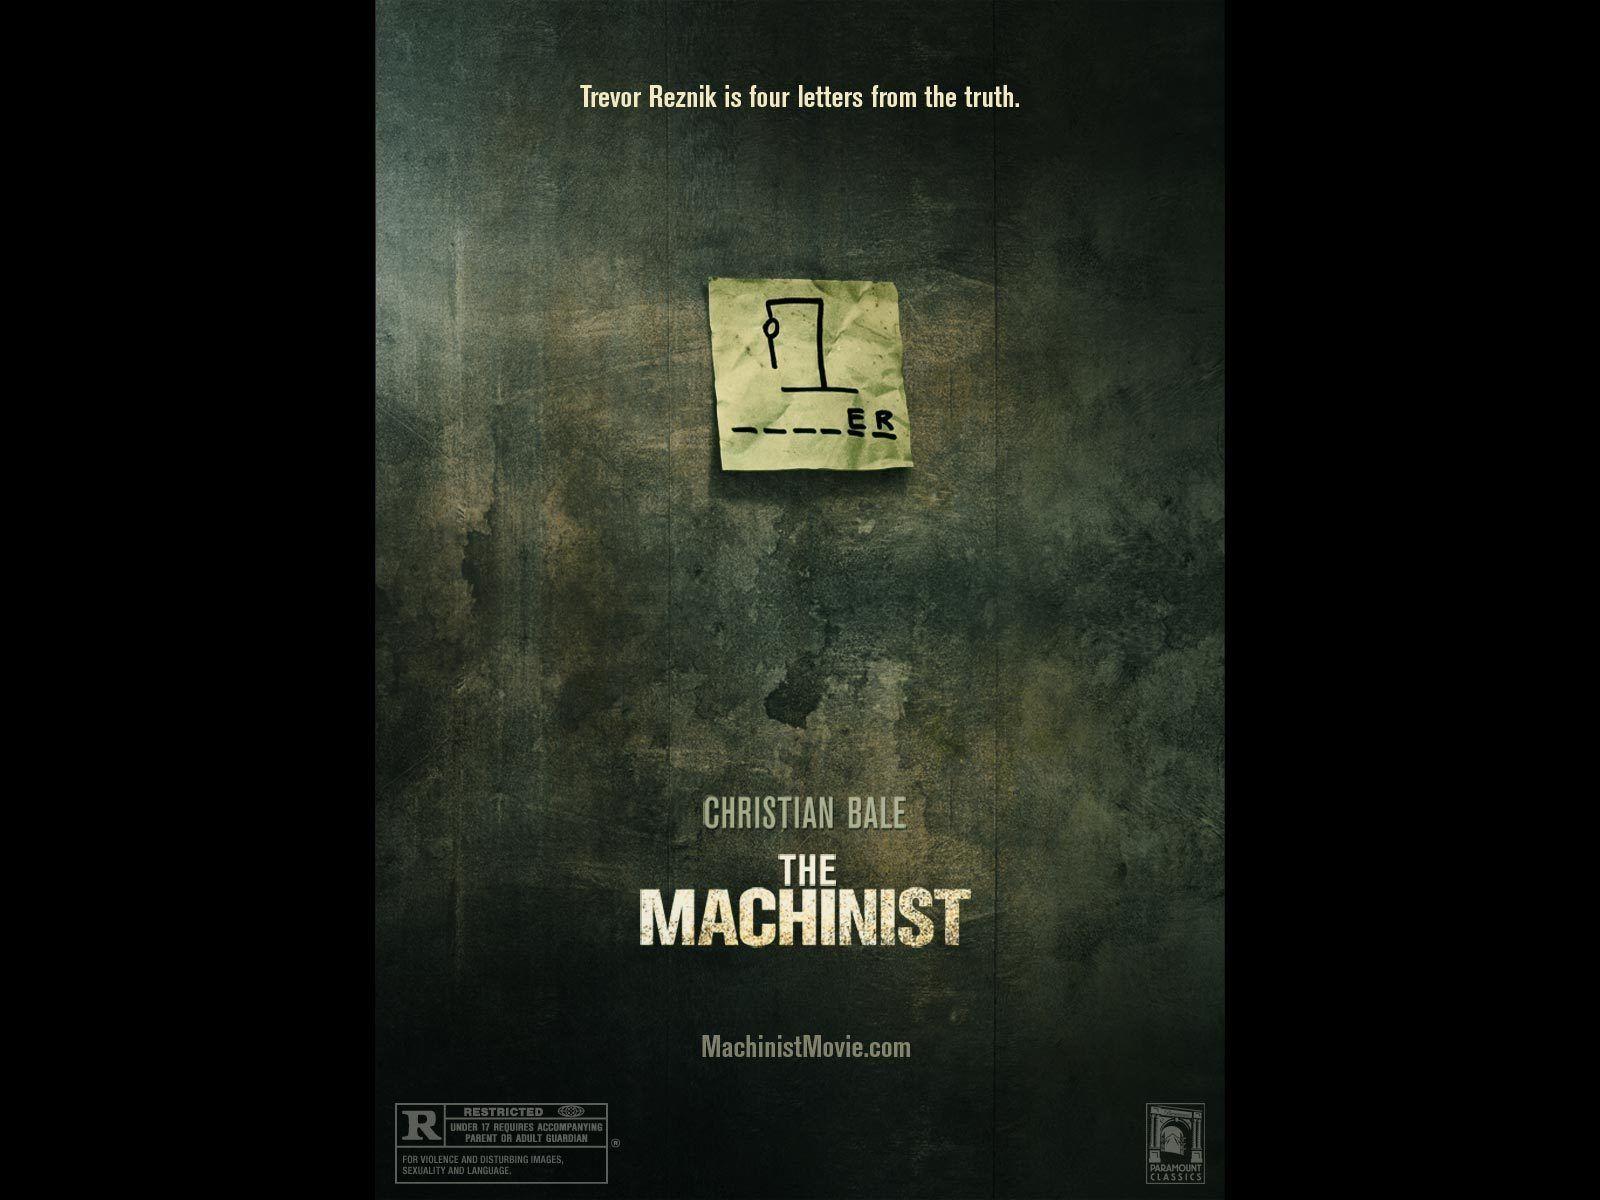 Final Fantasy XIV - Machinist Neon' Poster by Nick Strom | Displate